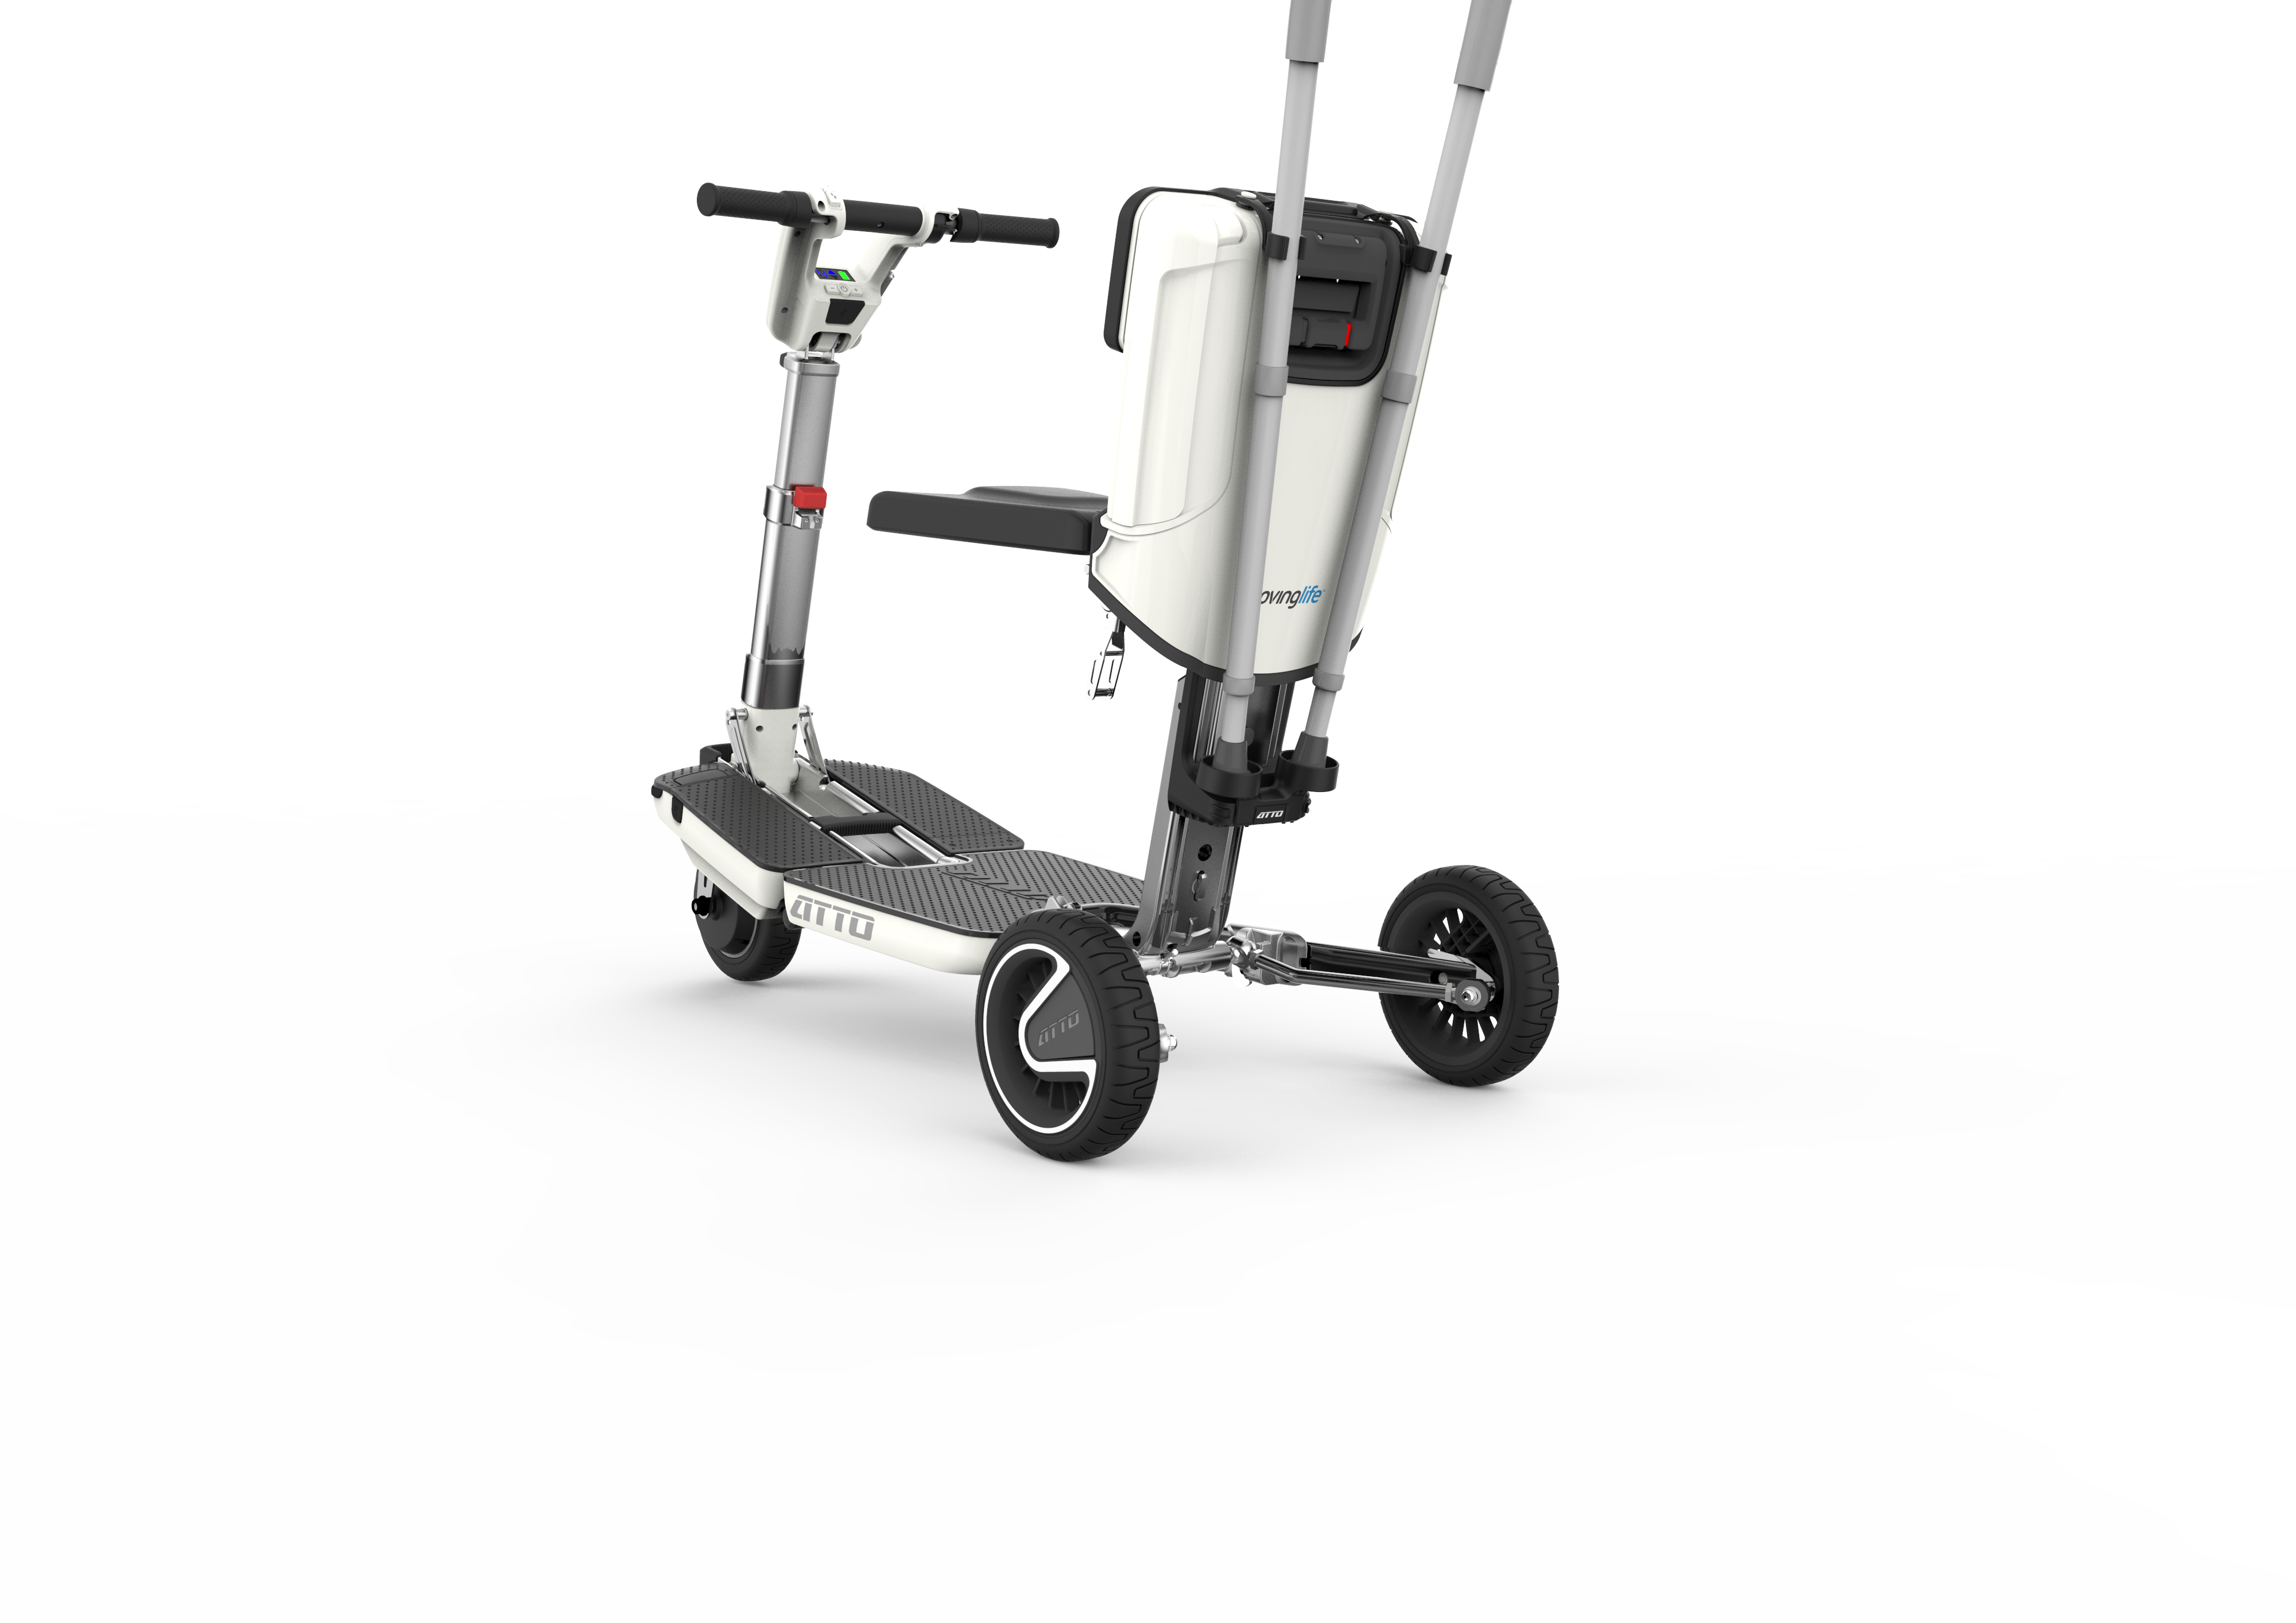 Crutch holders for Atto scooter